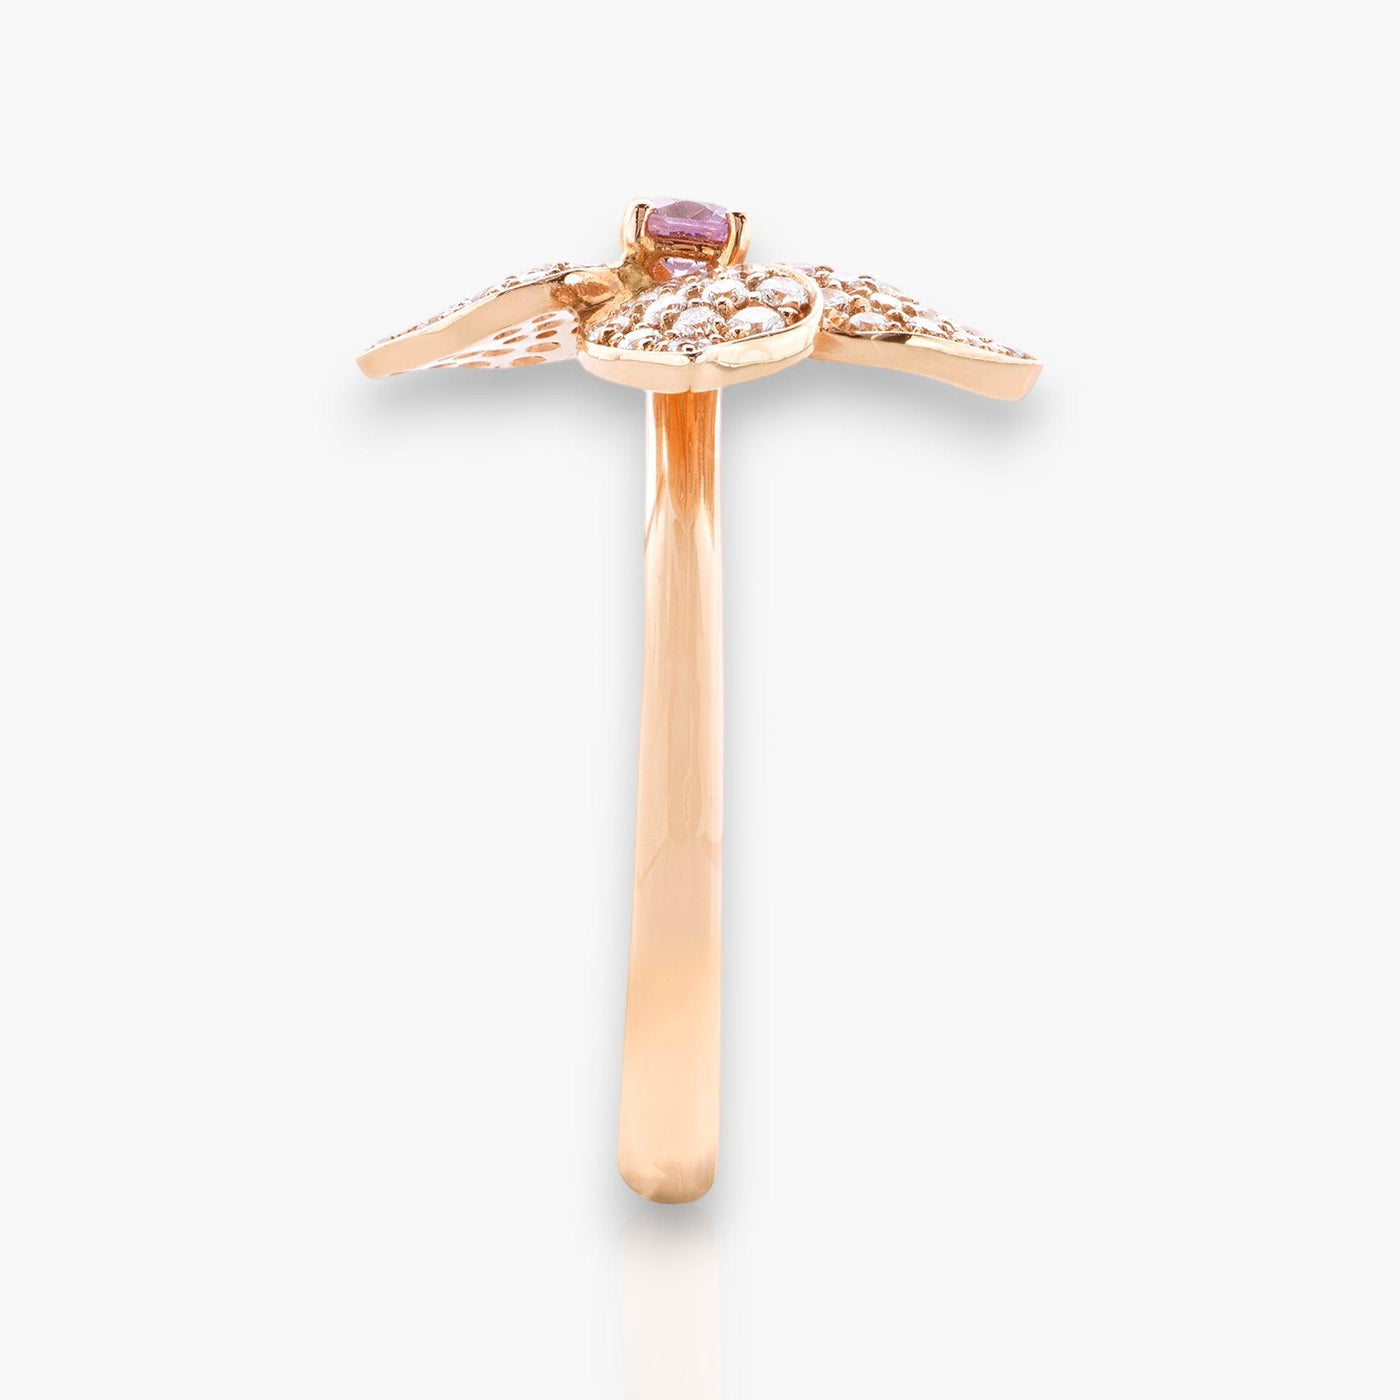 Ortensia Ring, Rose Gold, Diamonds And Pink Sapphire - Moregola Fine Jewelry